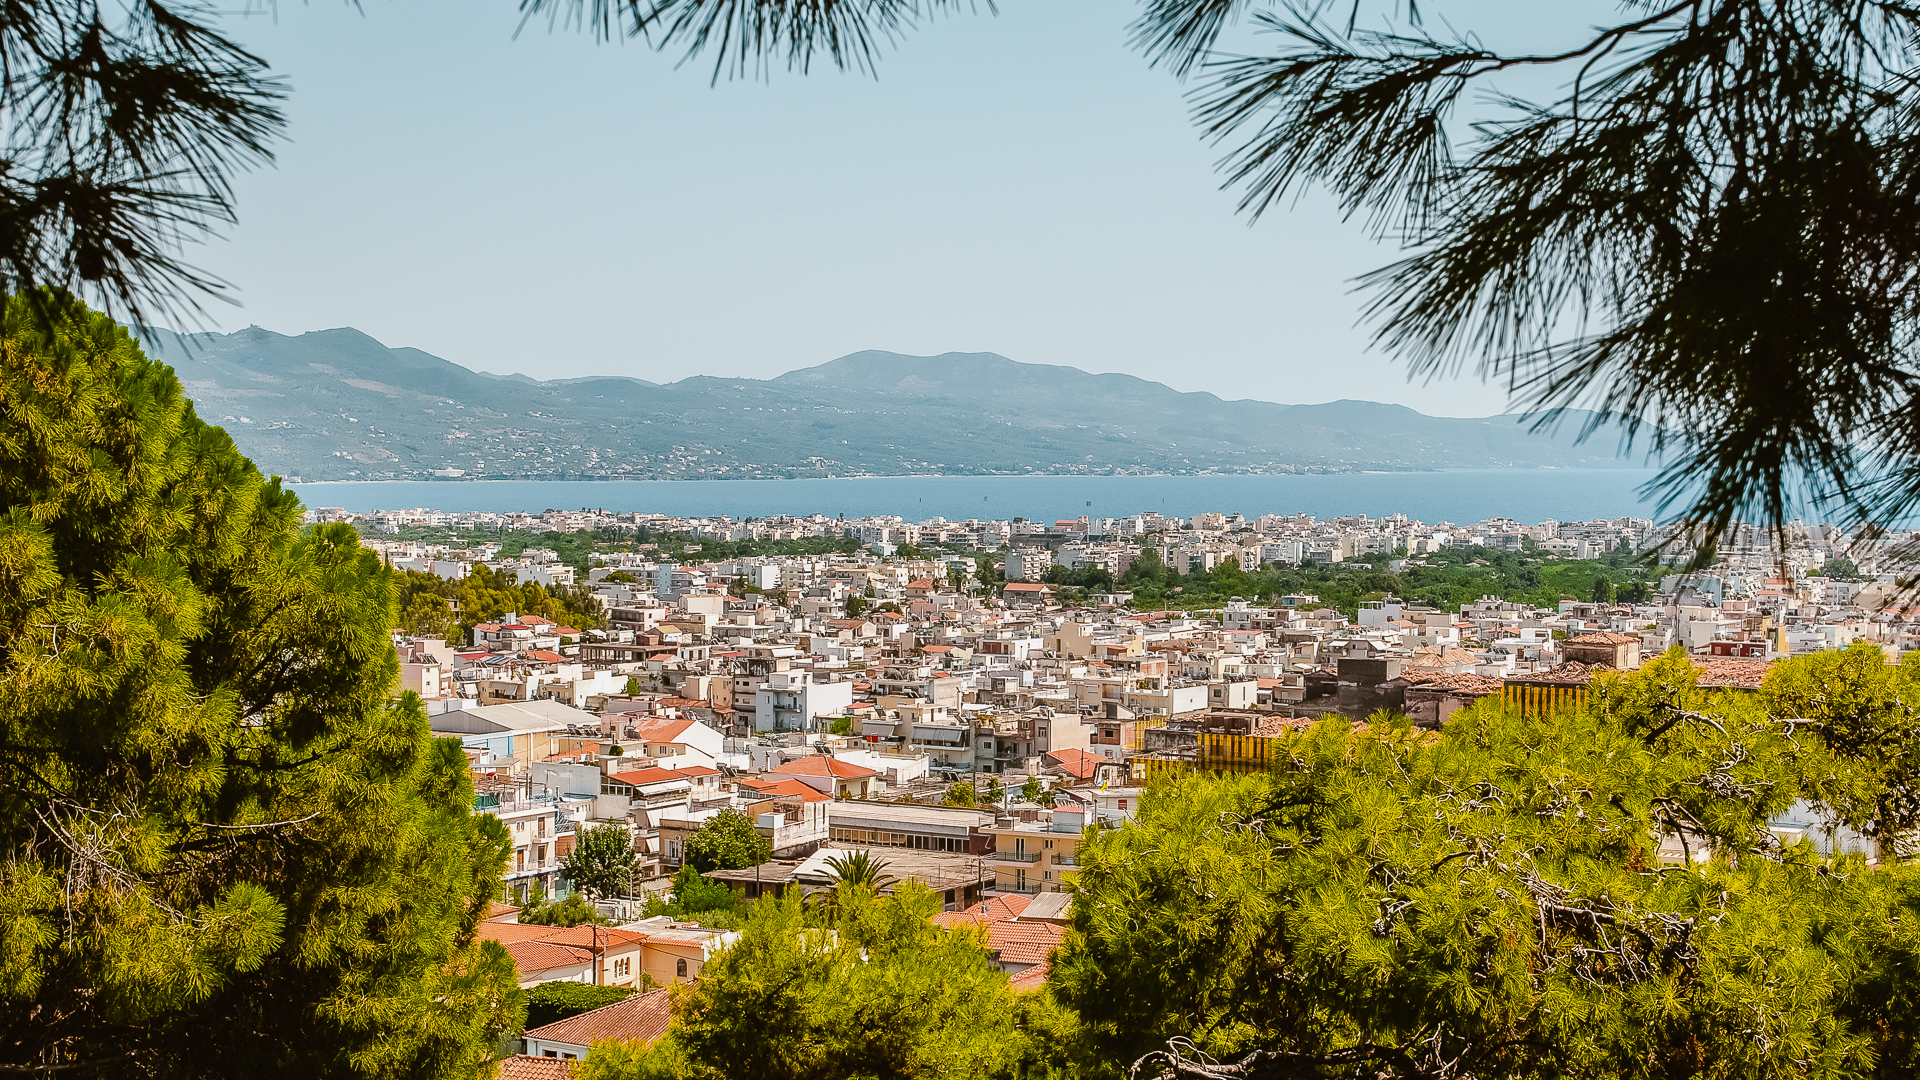 View of the City of Kalamata through some branches and trees